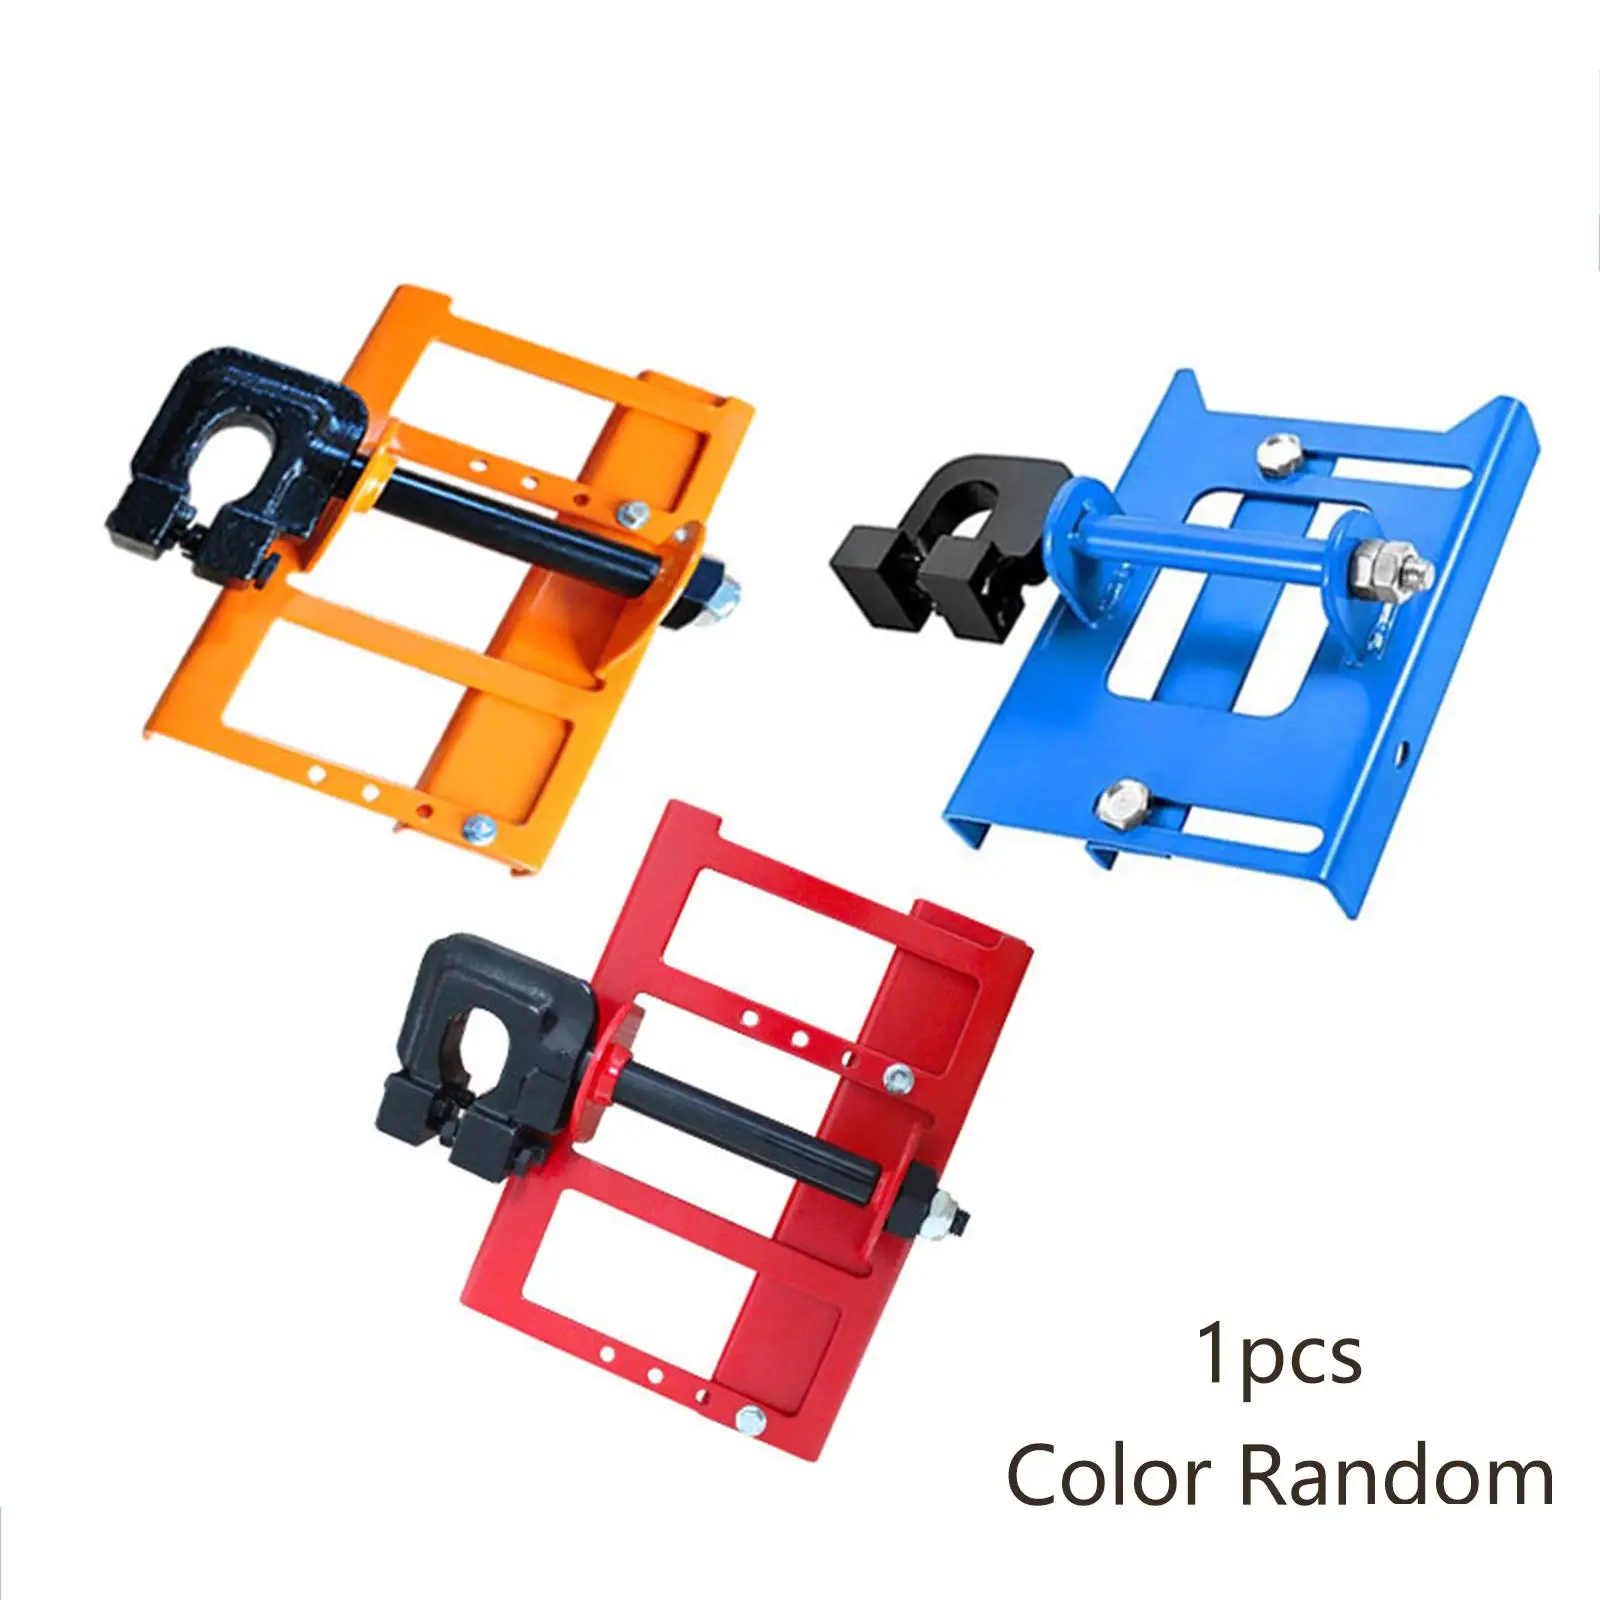 Chainsaw Portable Upgrade Parts Vertical Frame Cutting Guide for Builders